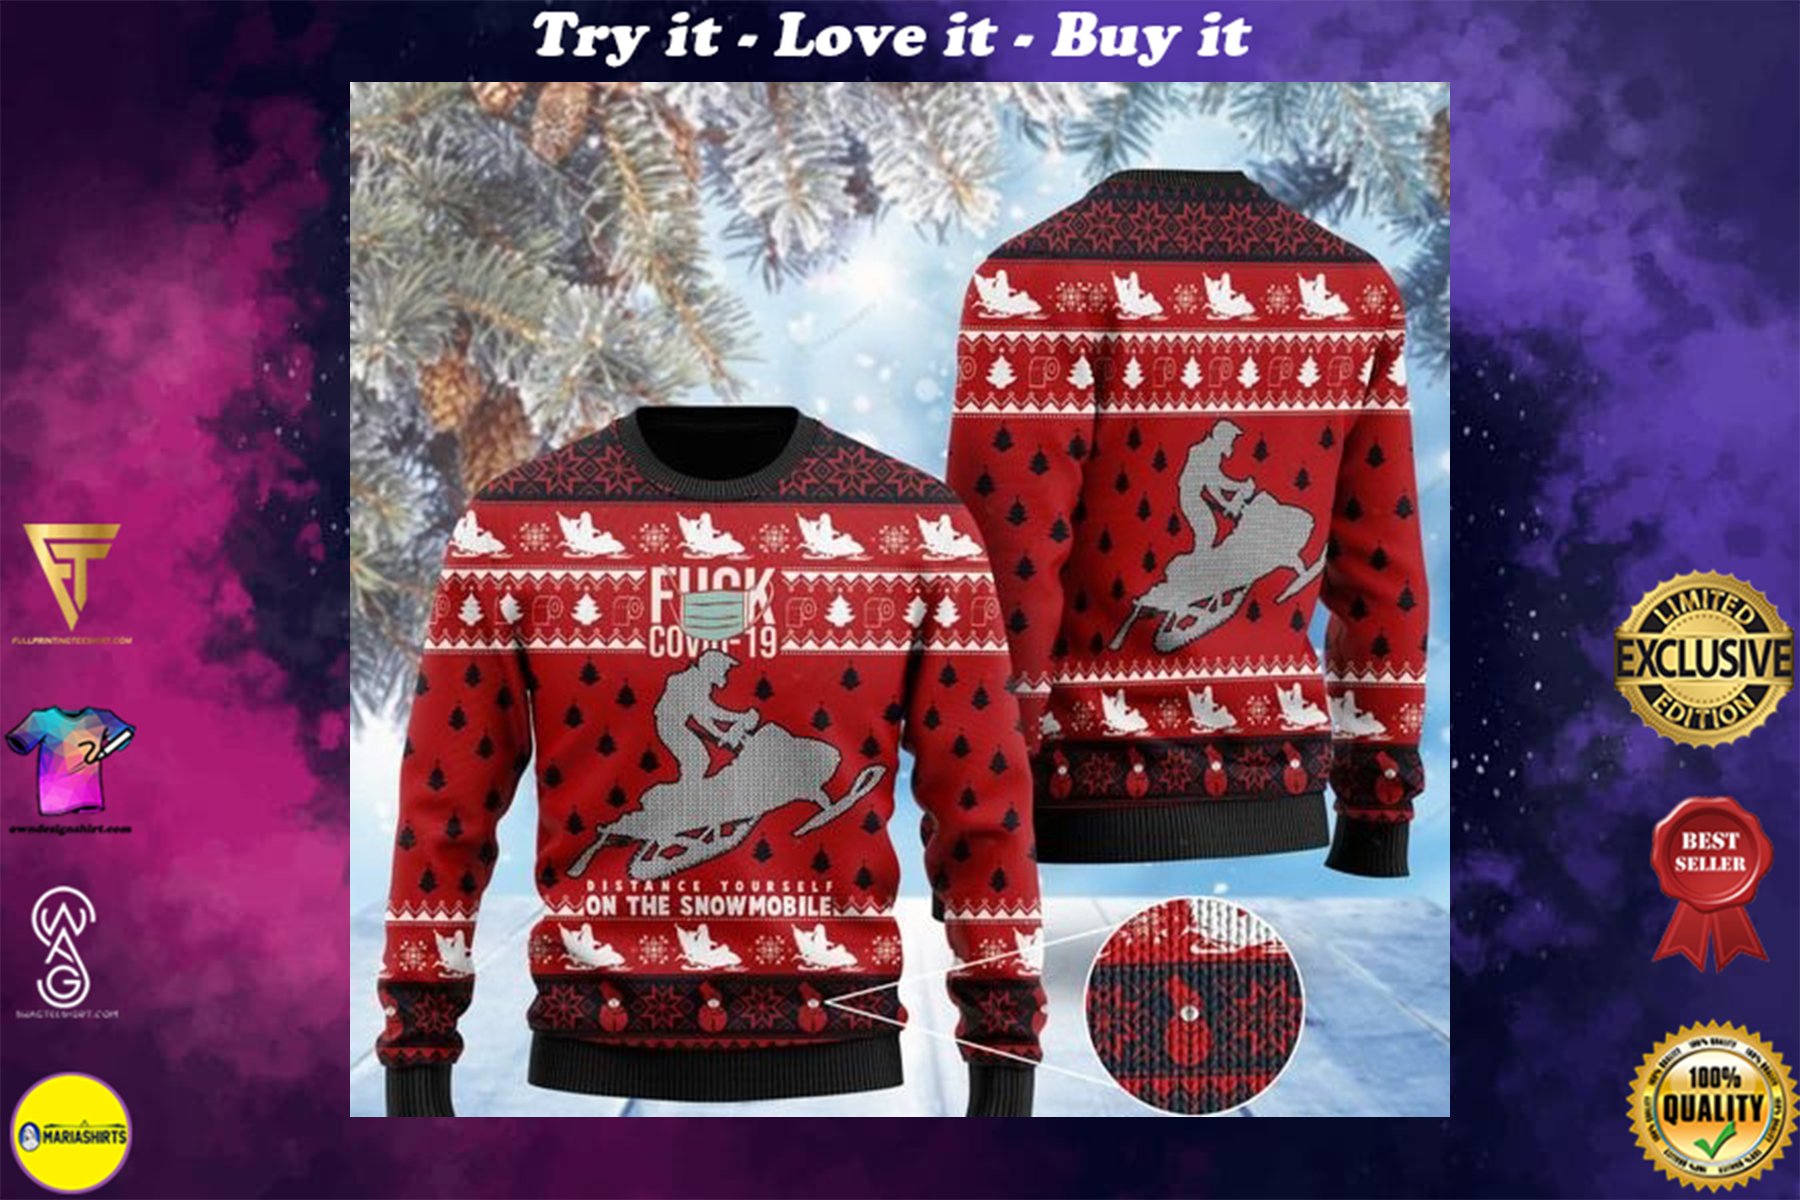 [highest selling] fuck covid distance yourself on the snowmobile 2020 ugly sweater - maria